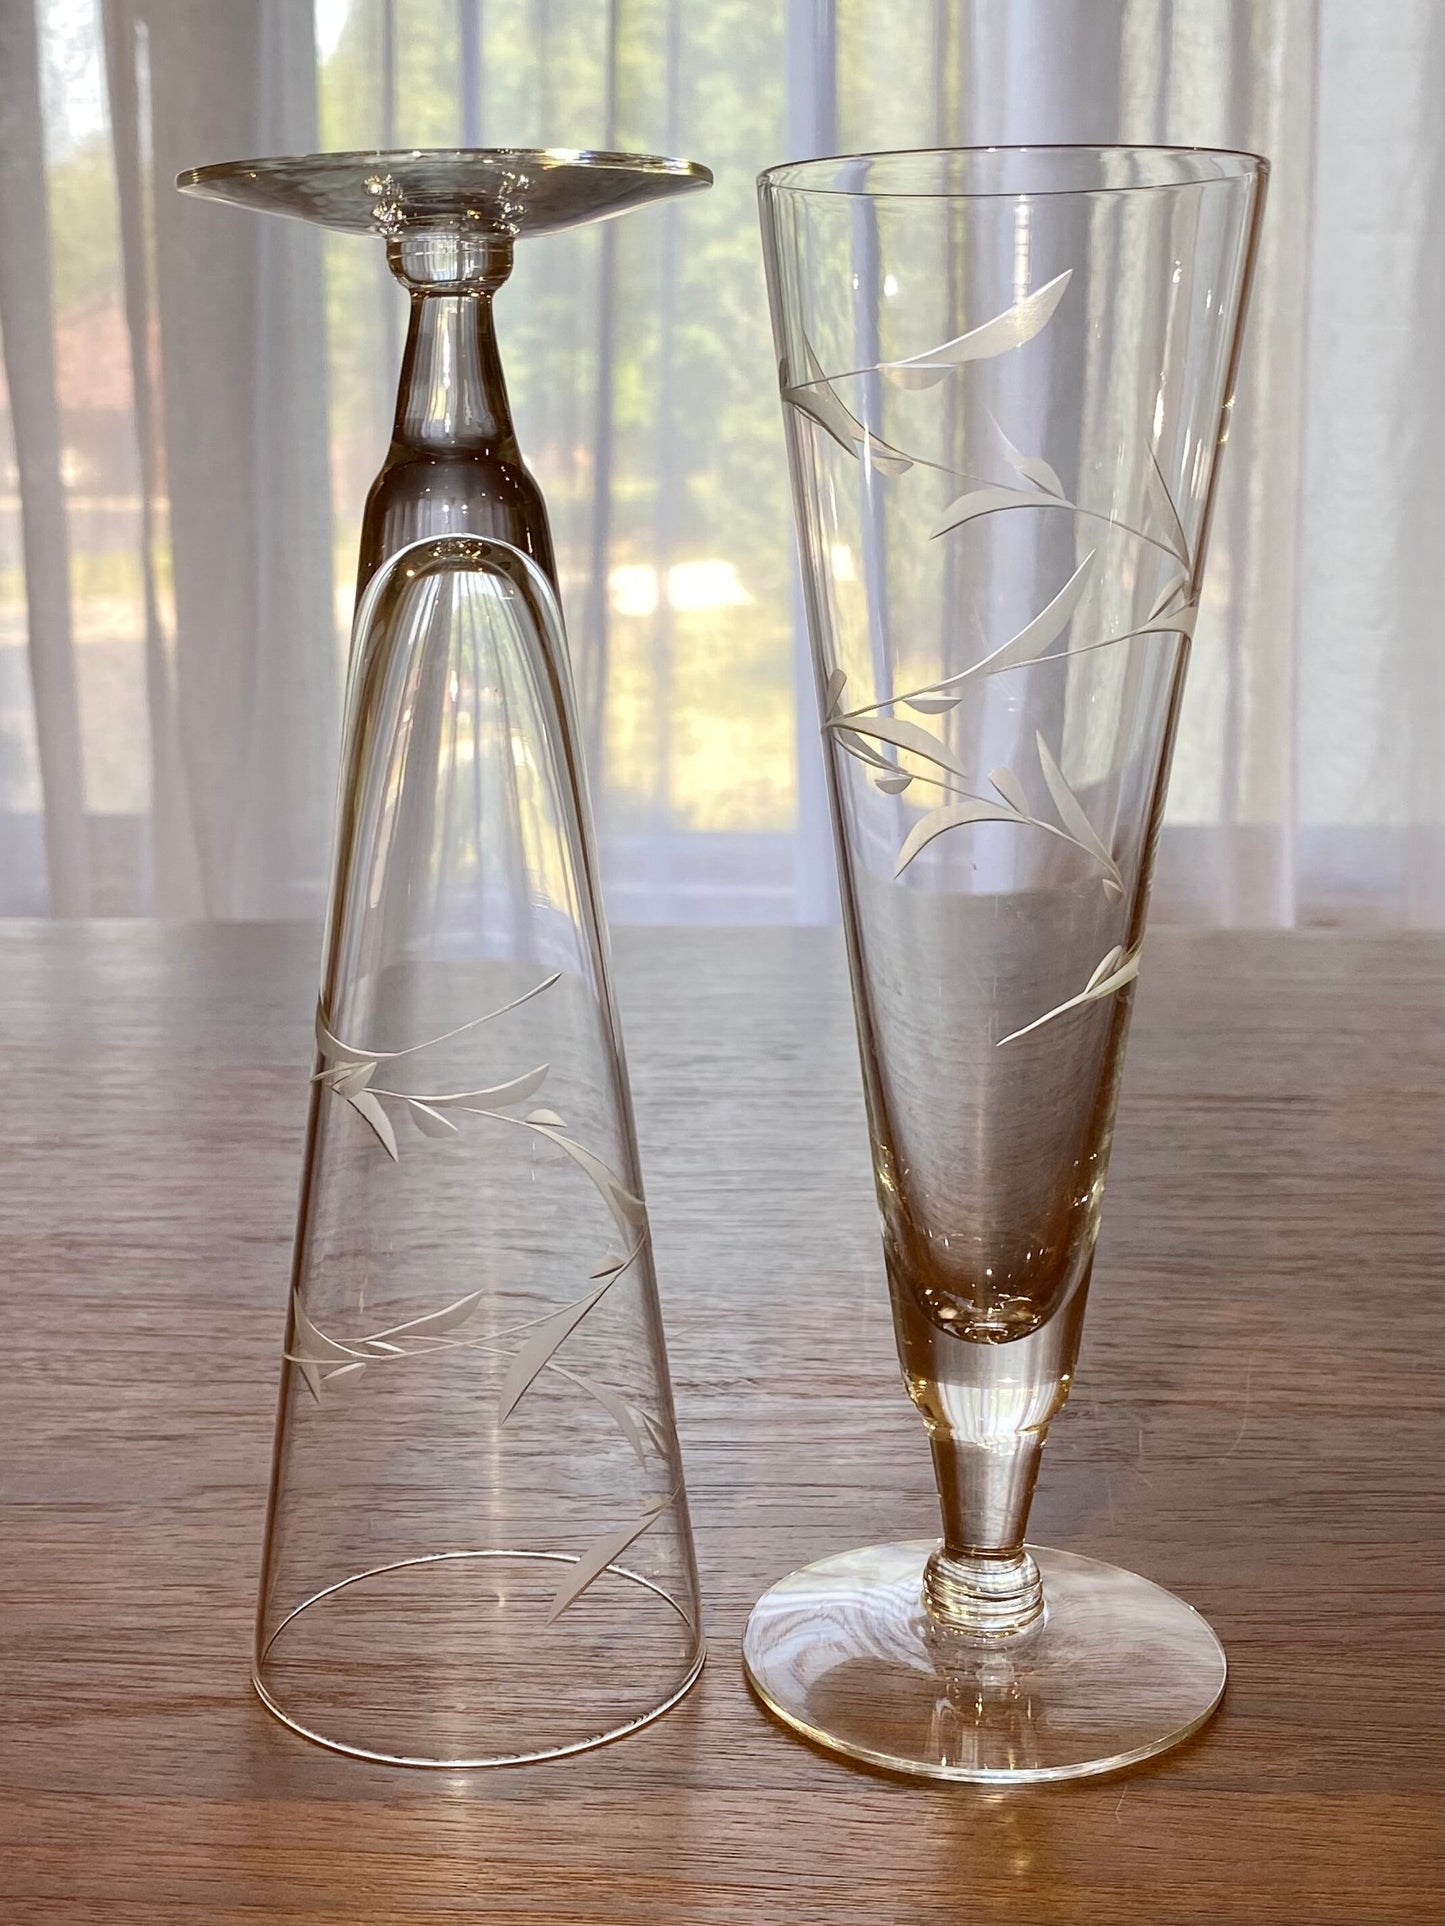 Vintage Etched Tall Footed Tumblers - Set of 6